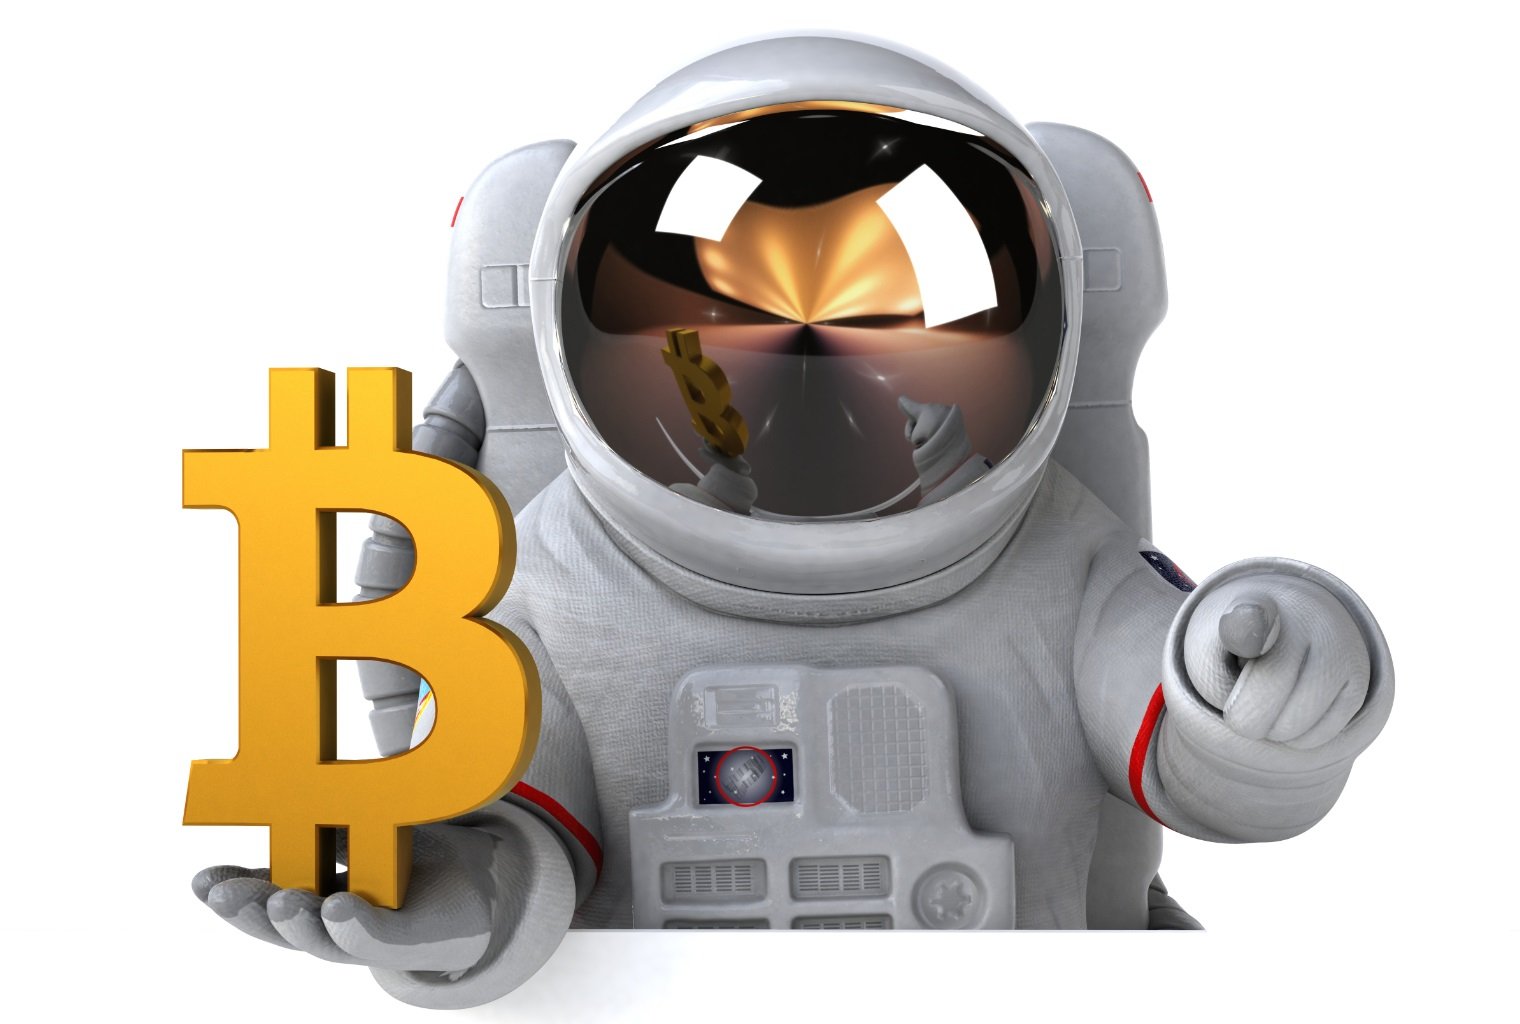 2x Bitcoin: Wanna Double Your BTC to the Moon? Forget About It